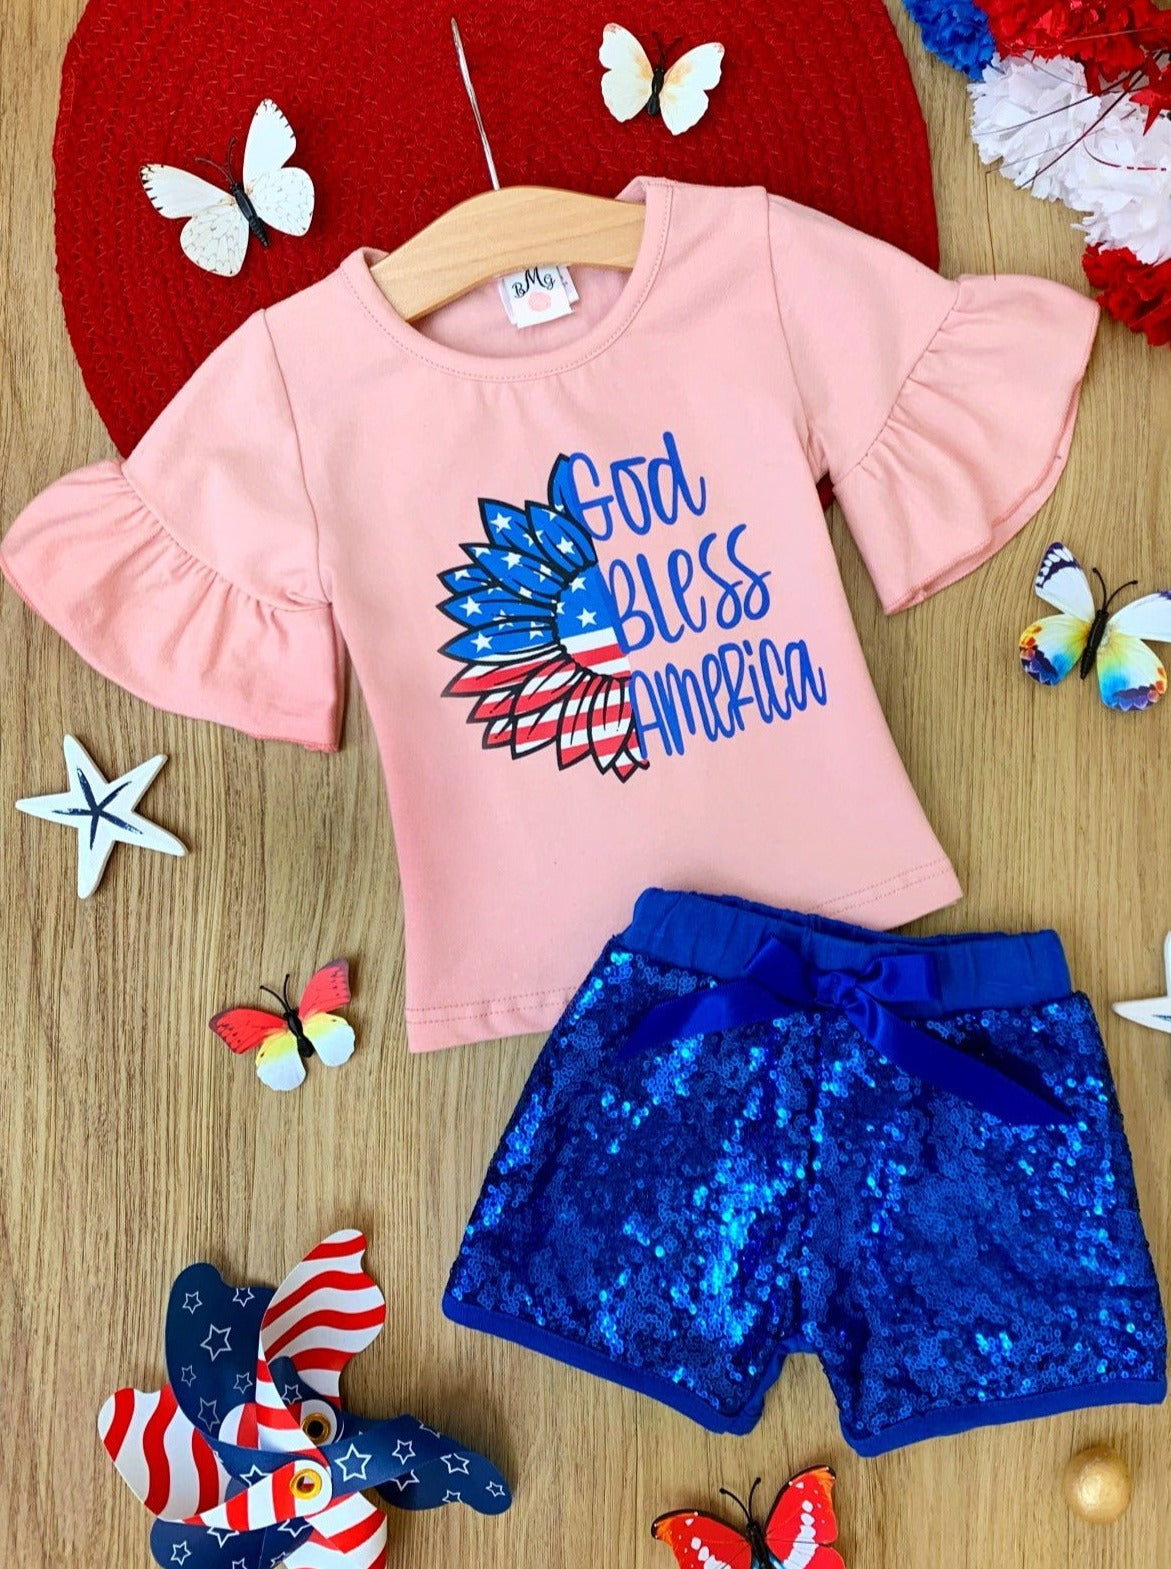 Girls Set features a white top with "God Bless America" print and sequin shorts with a sash